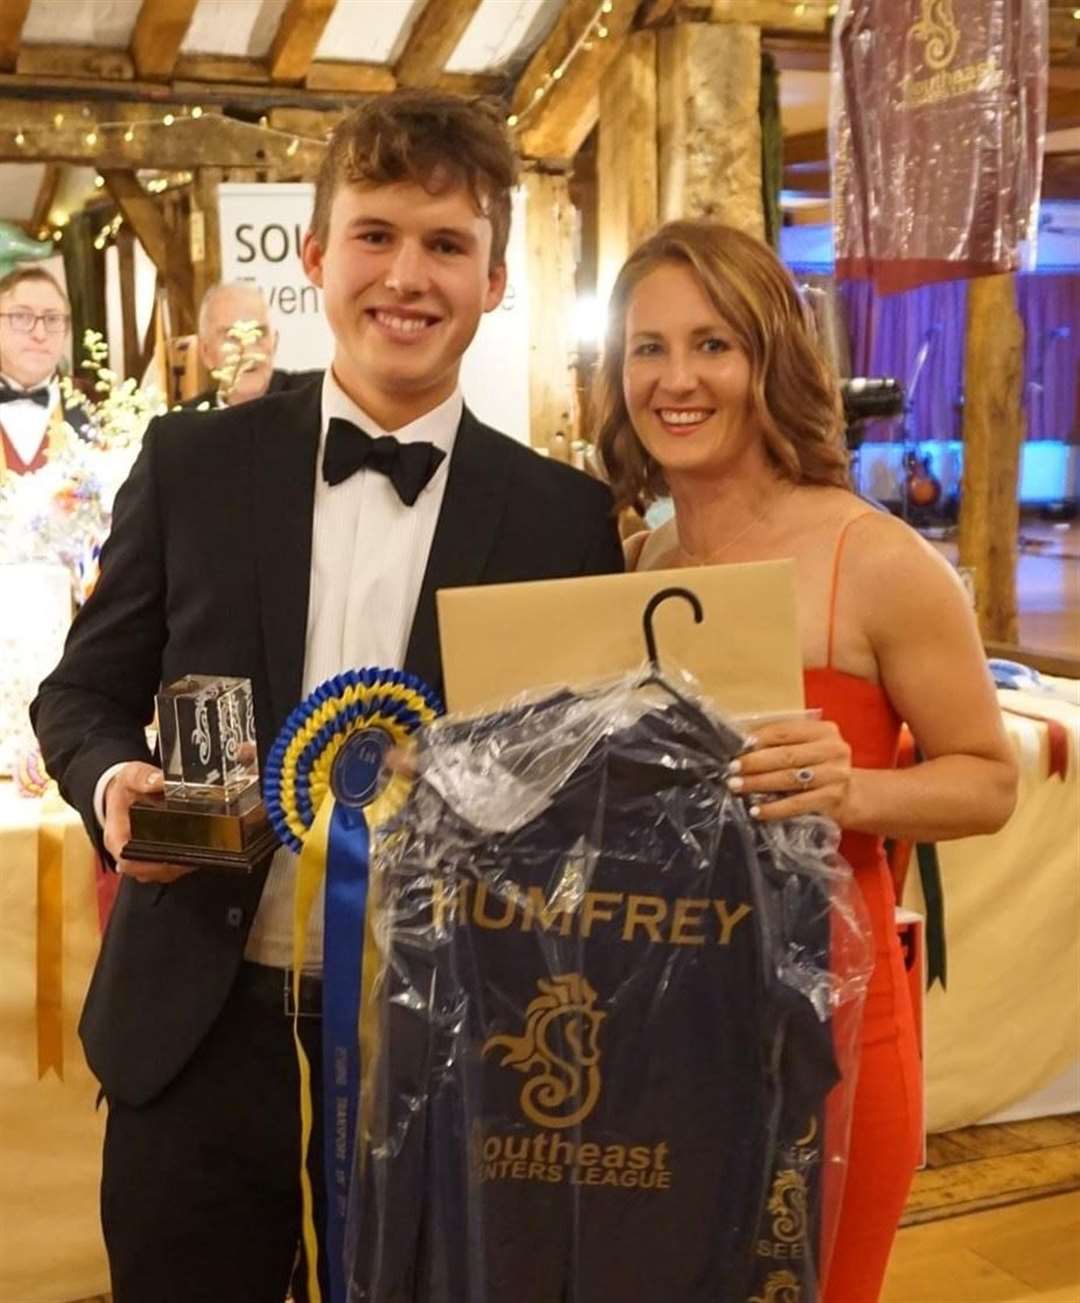 Hildenborough's Archie Humfrey at the South East Eventers League ball with committee member Camilla Kruger